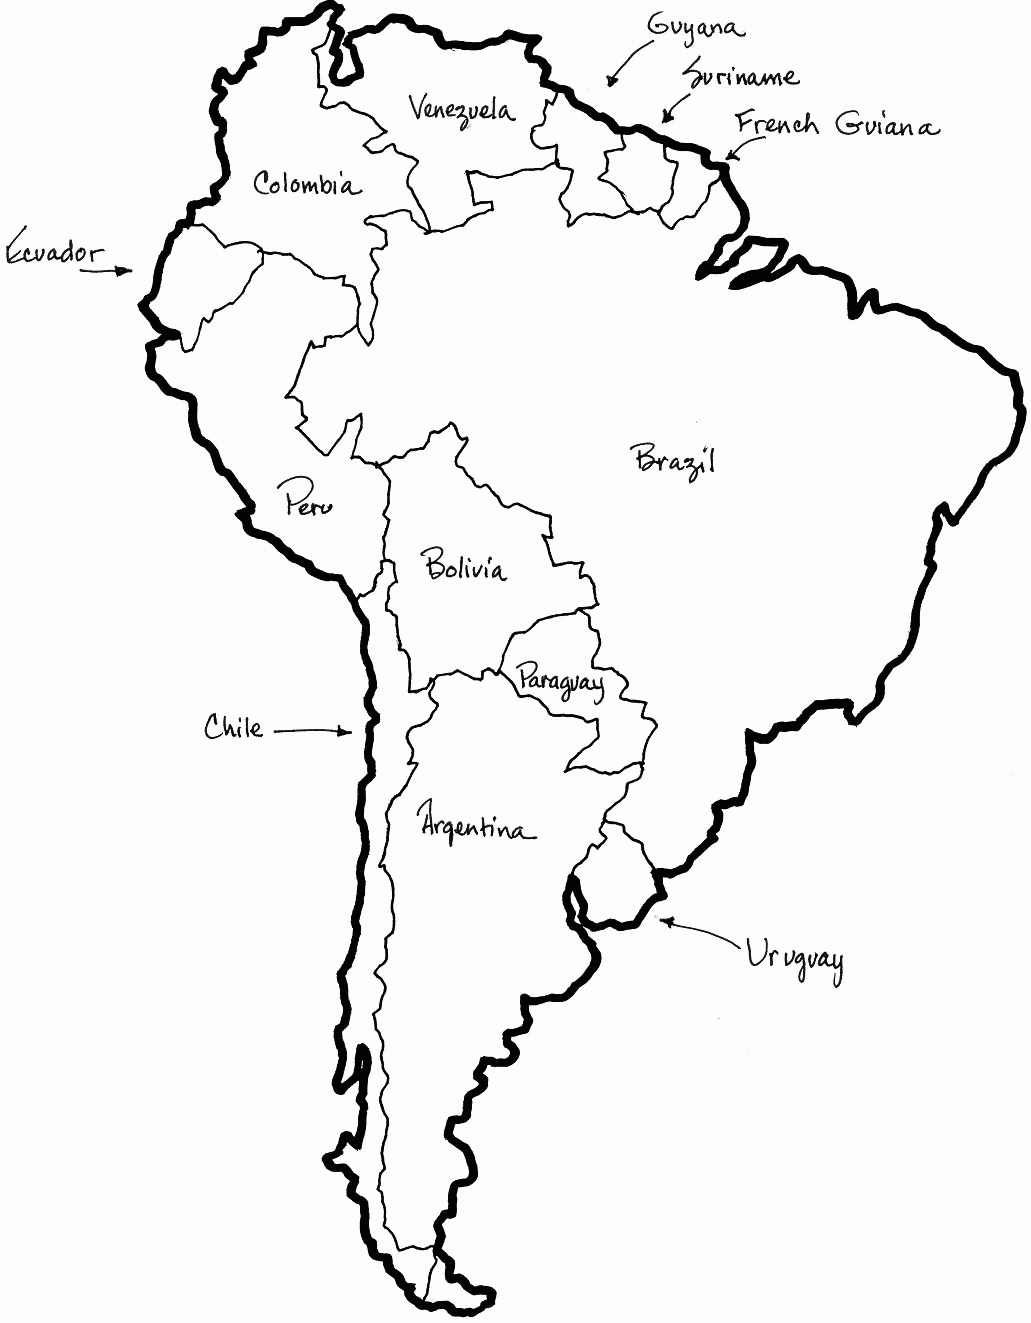 Download or print this amazing coloring page south america map coloring pages